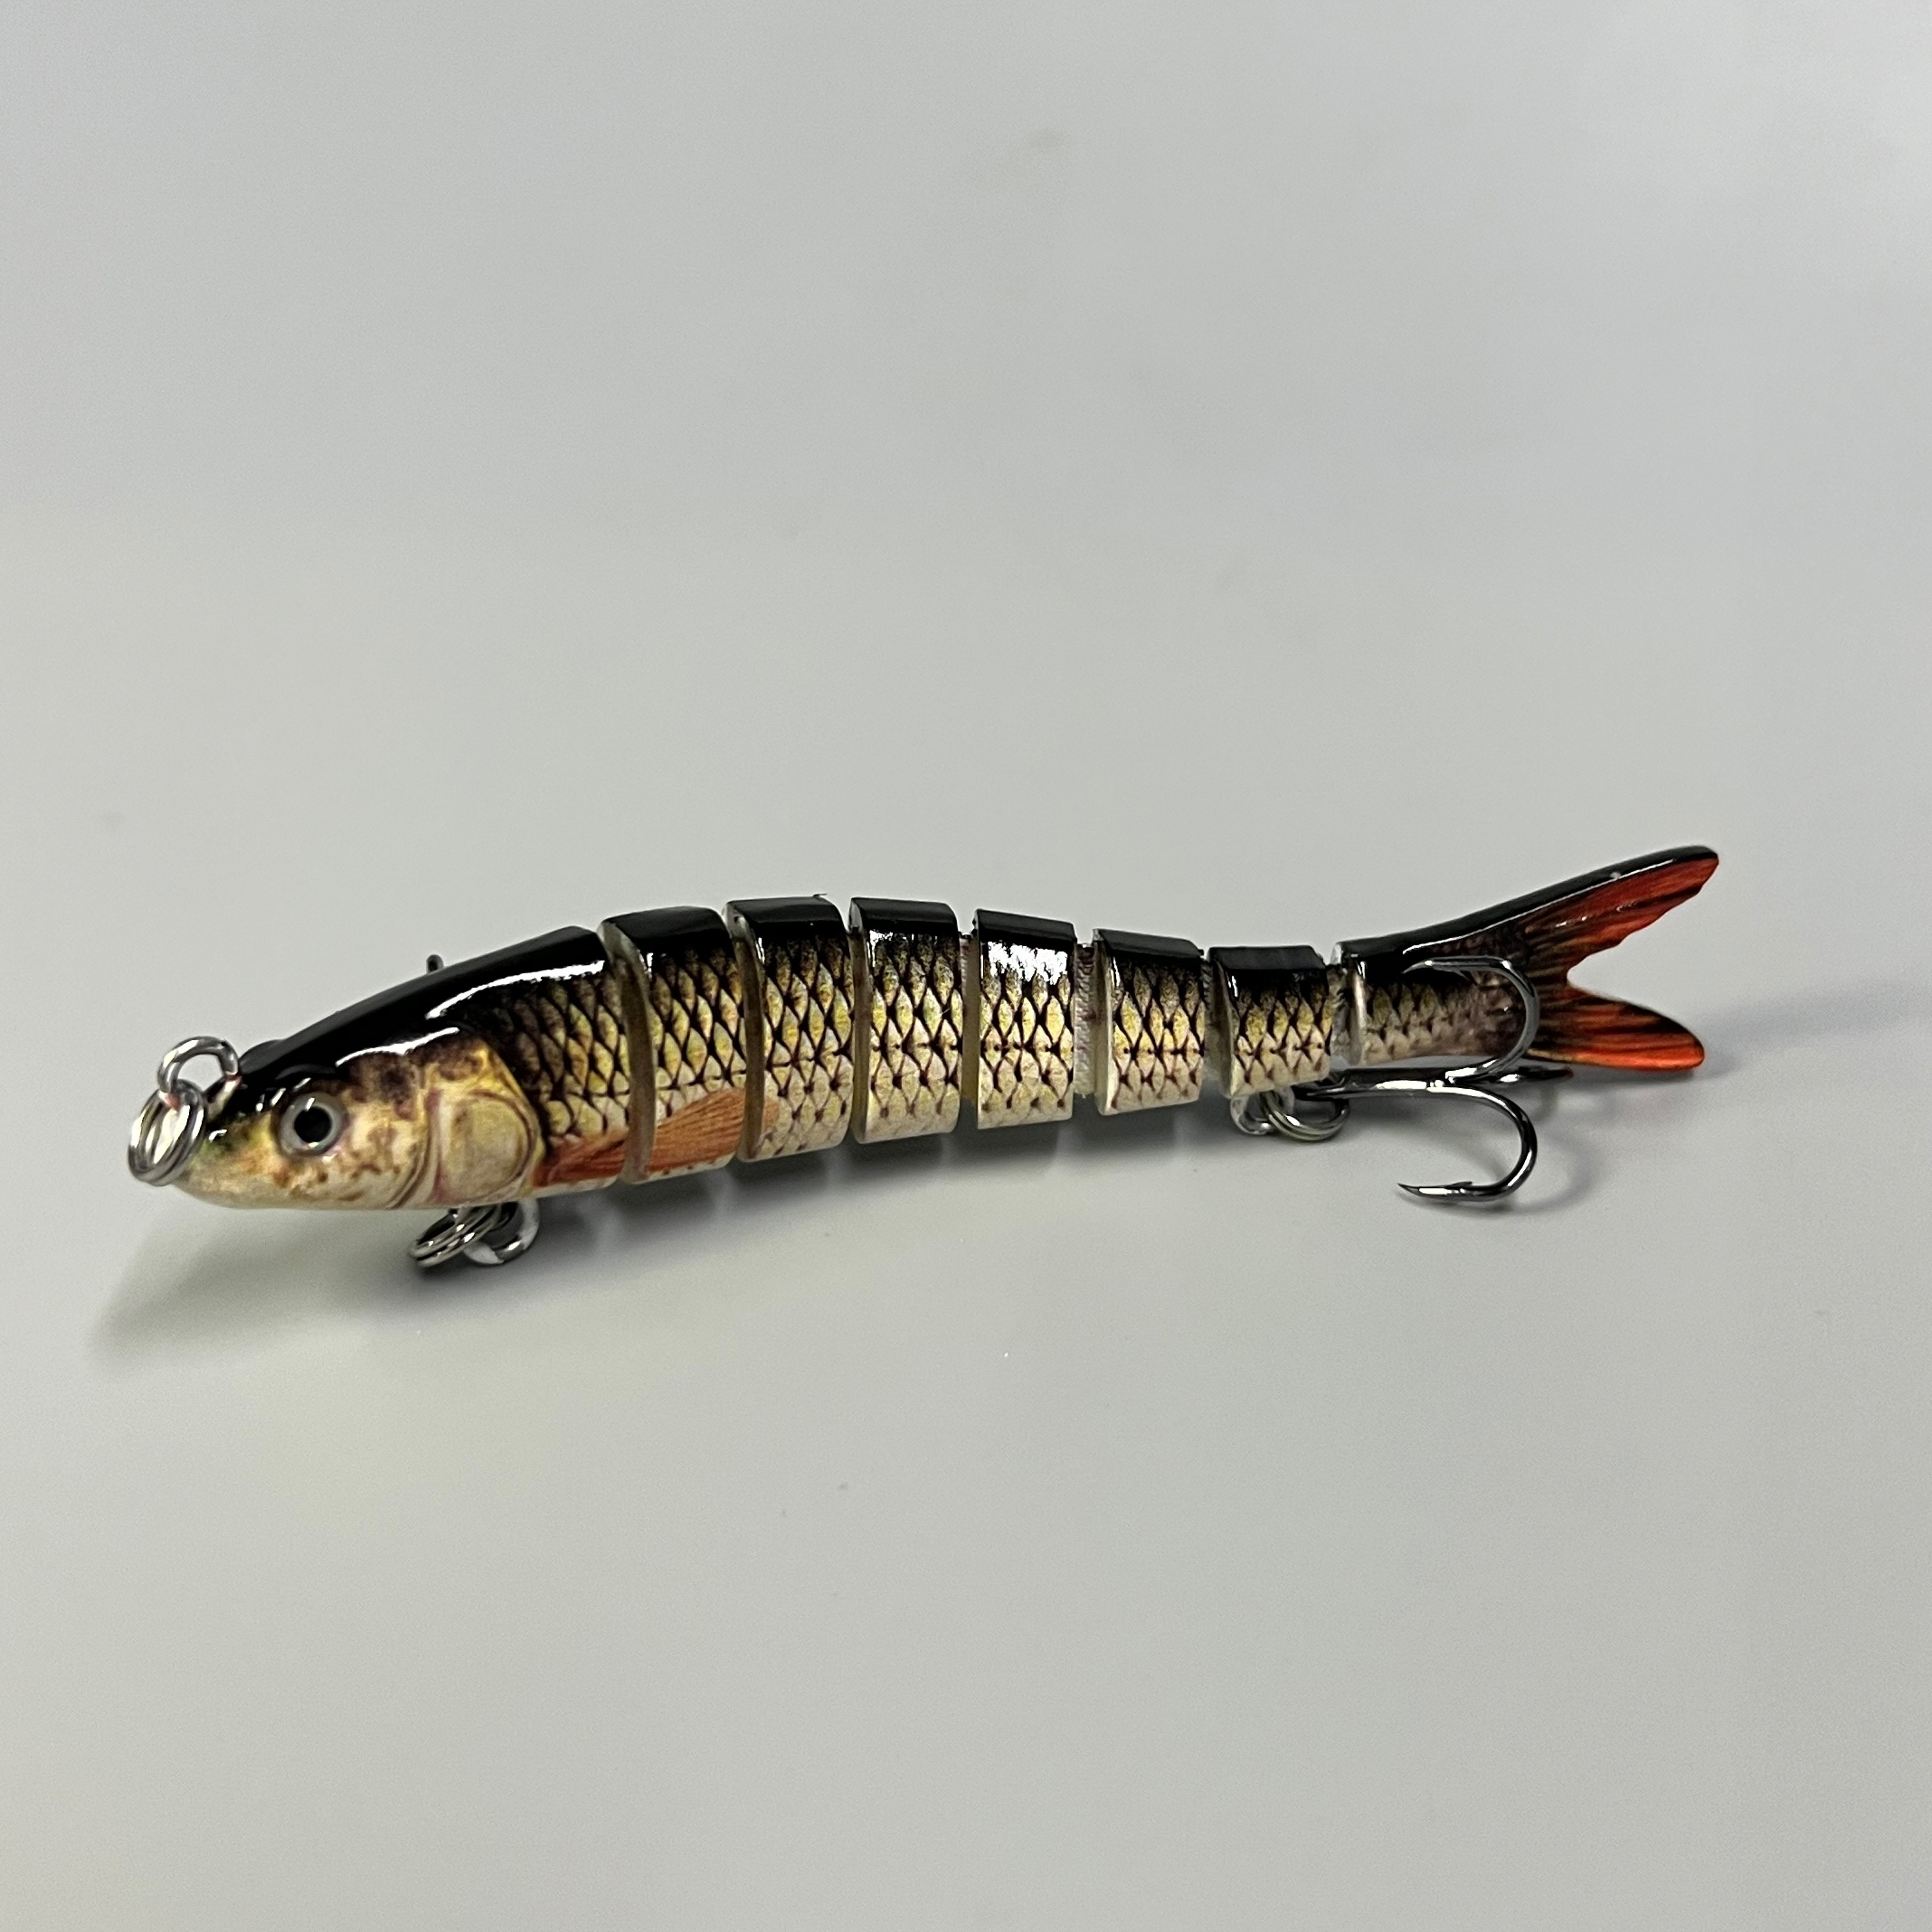 Artificial Lures, Swimbait Fishing, Artificial Bait, Fishing Tackle